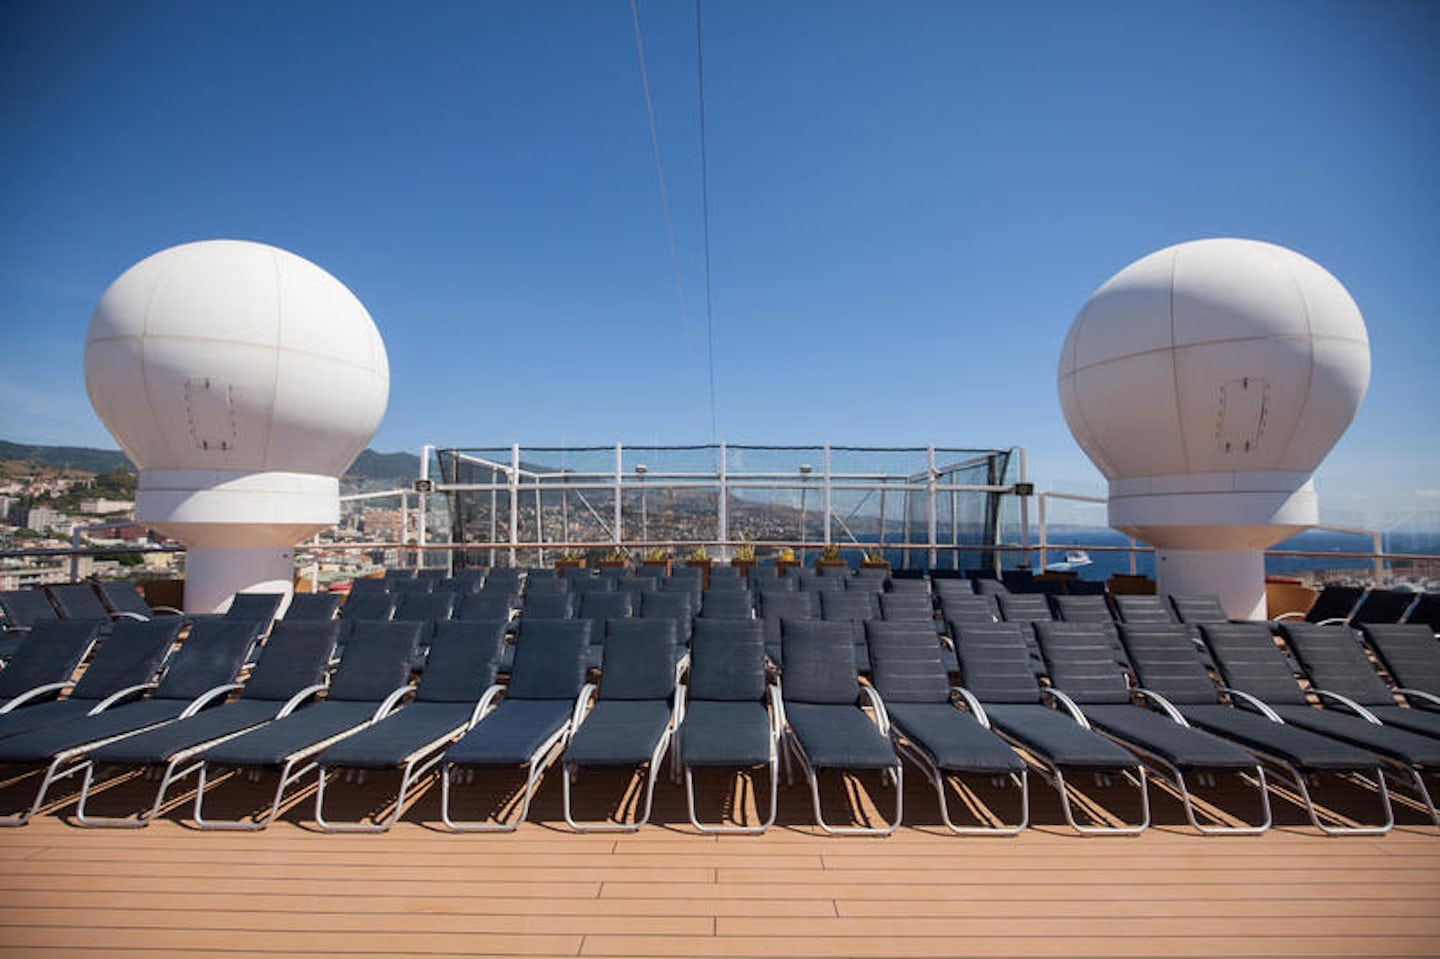 The Solstice Deck on Celebrity Reflection